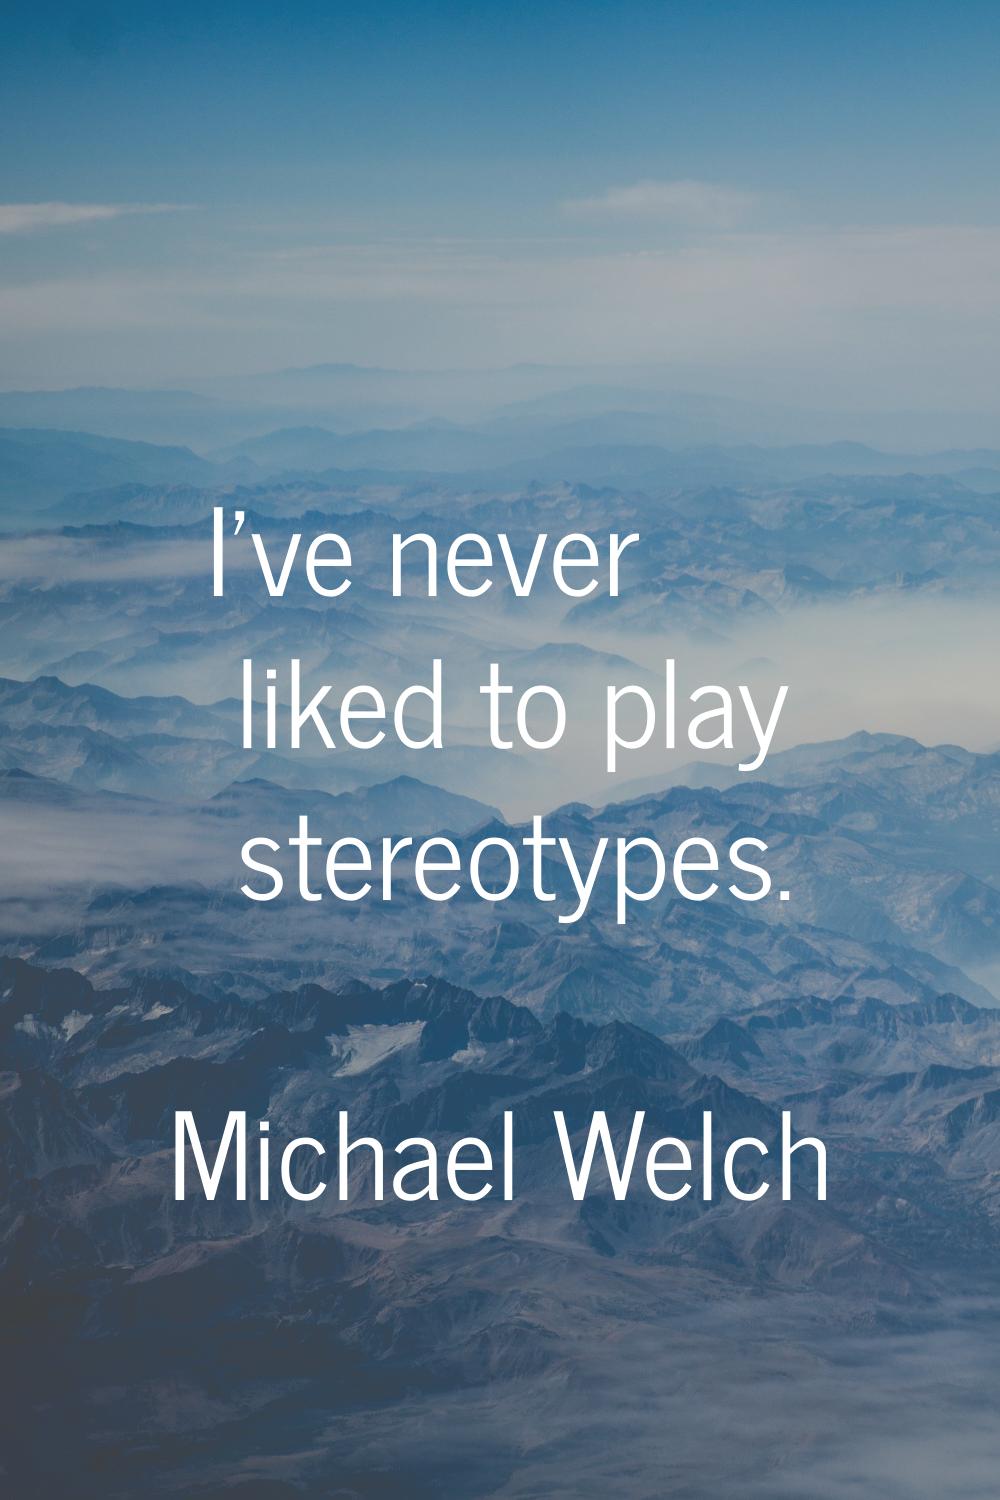 I've never liked to play stereotypes.